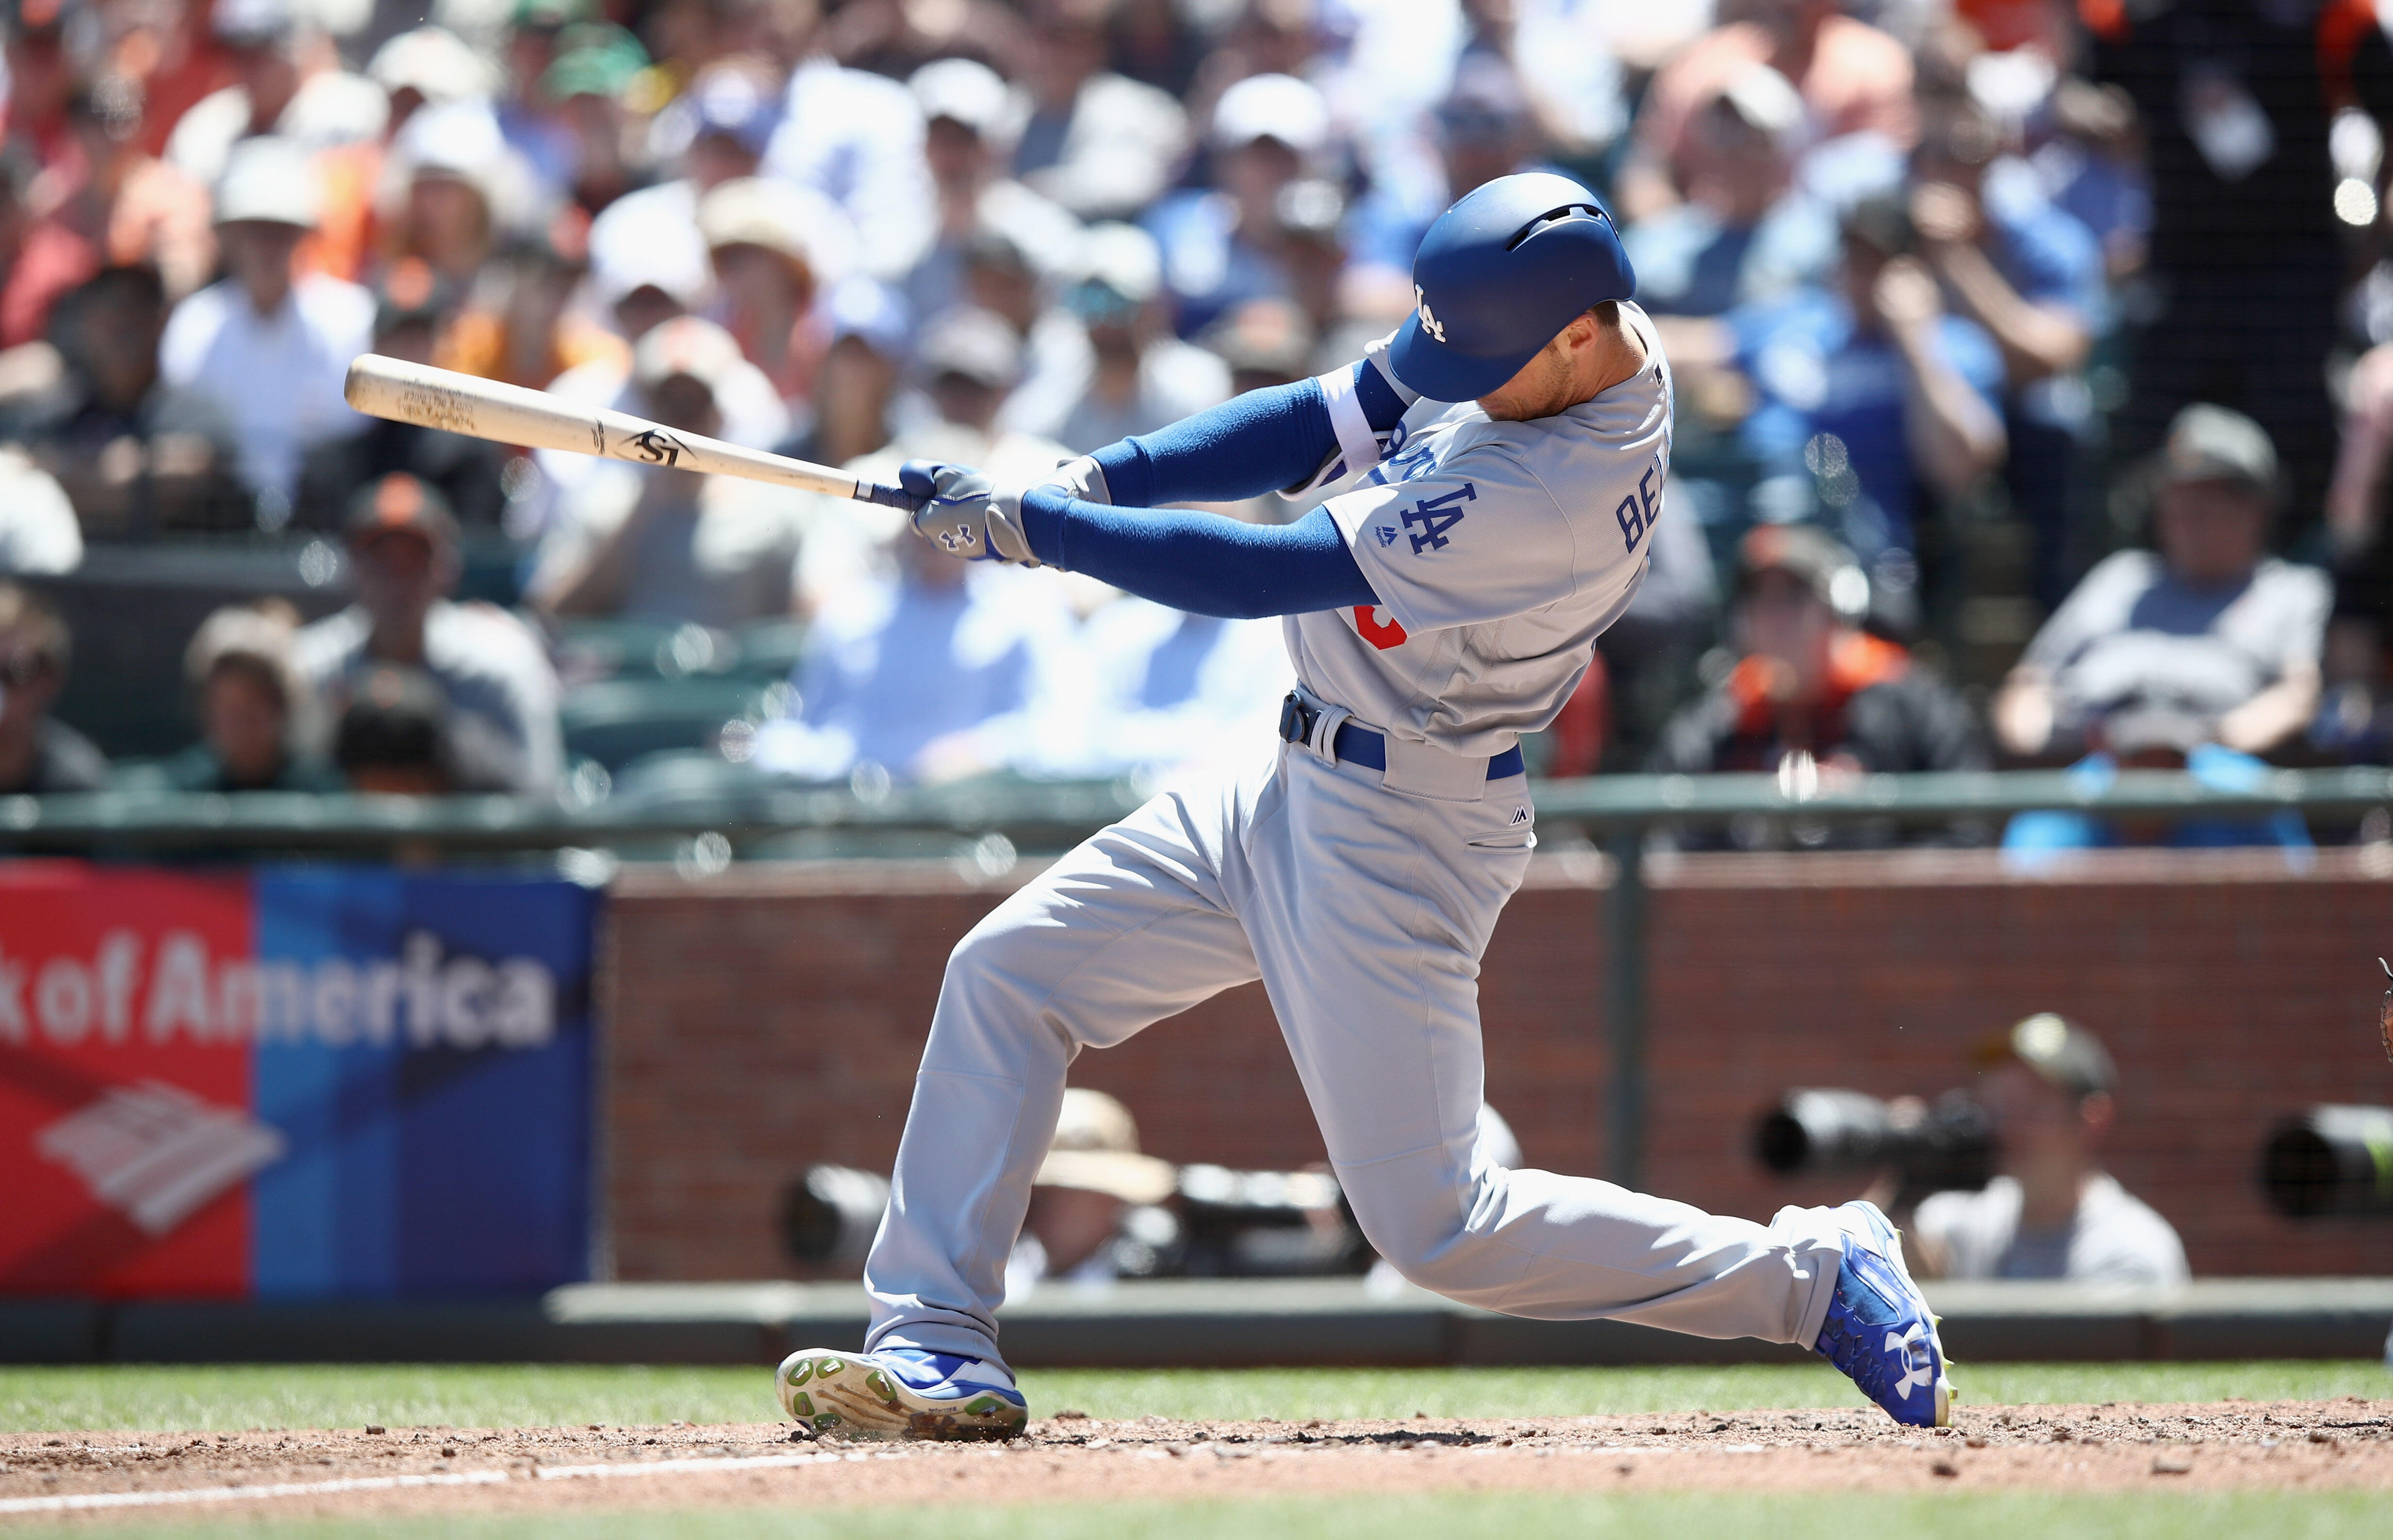 SAN FRANCISCO, CA - MAY 17:  Cody Bellinger #35 of the Los Angeles Dodgers hits a double in the sixth inning at AT&T Park on May 17, 2017 in San Francisco, California.  (Photo by Ezra Shaw/Getty Images)